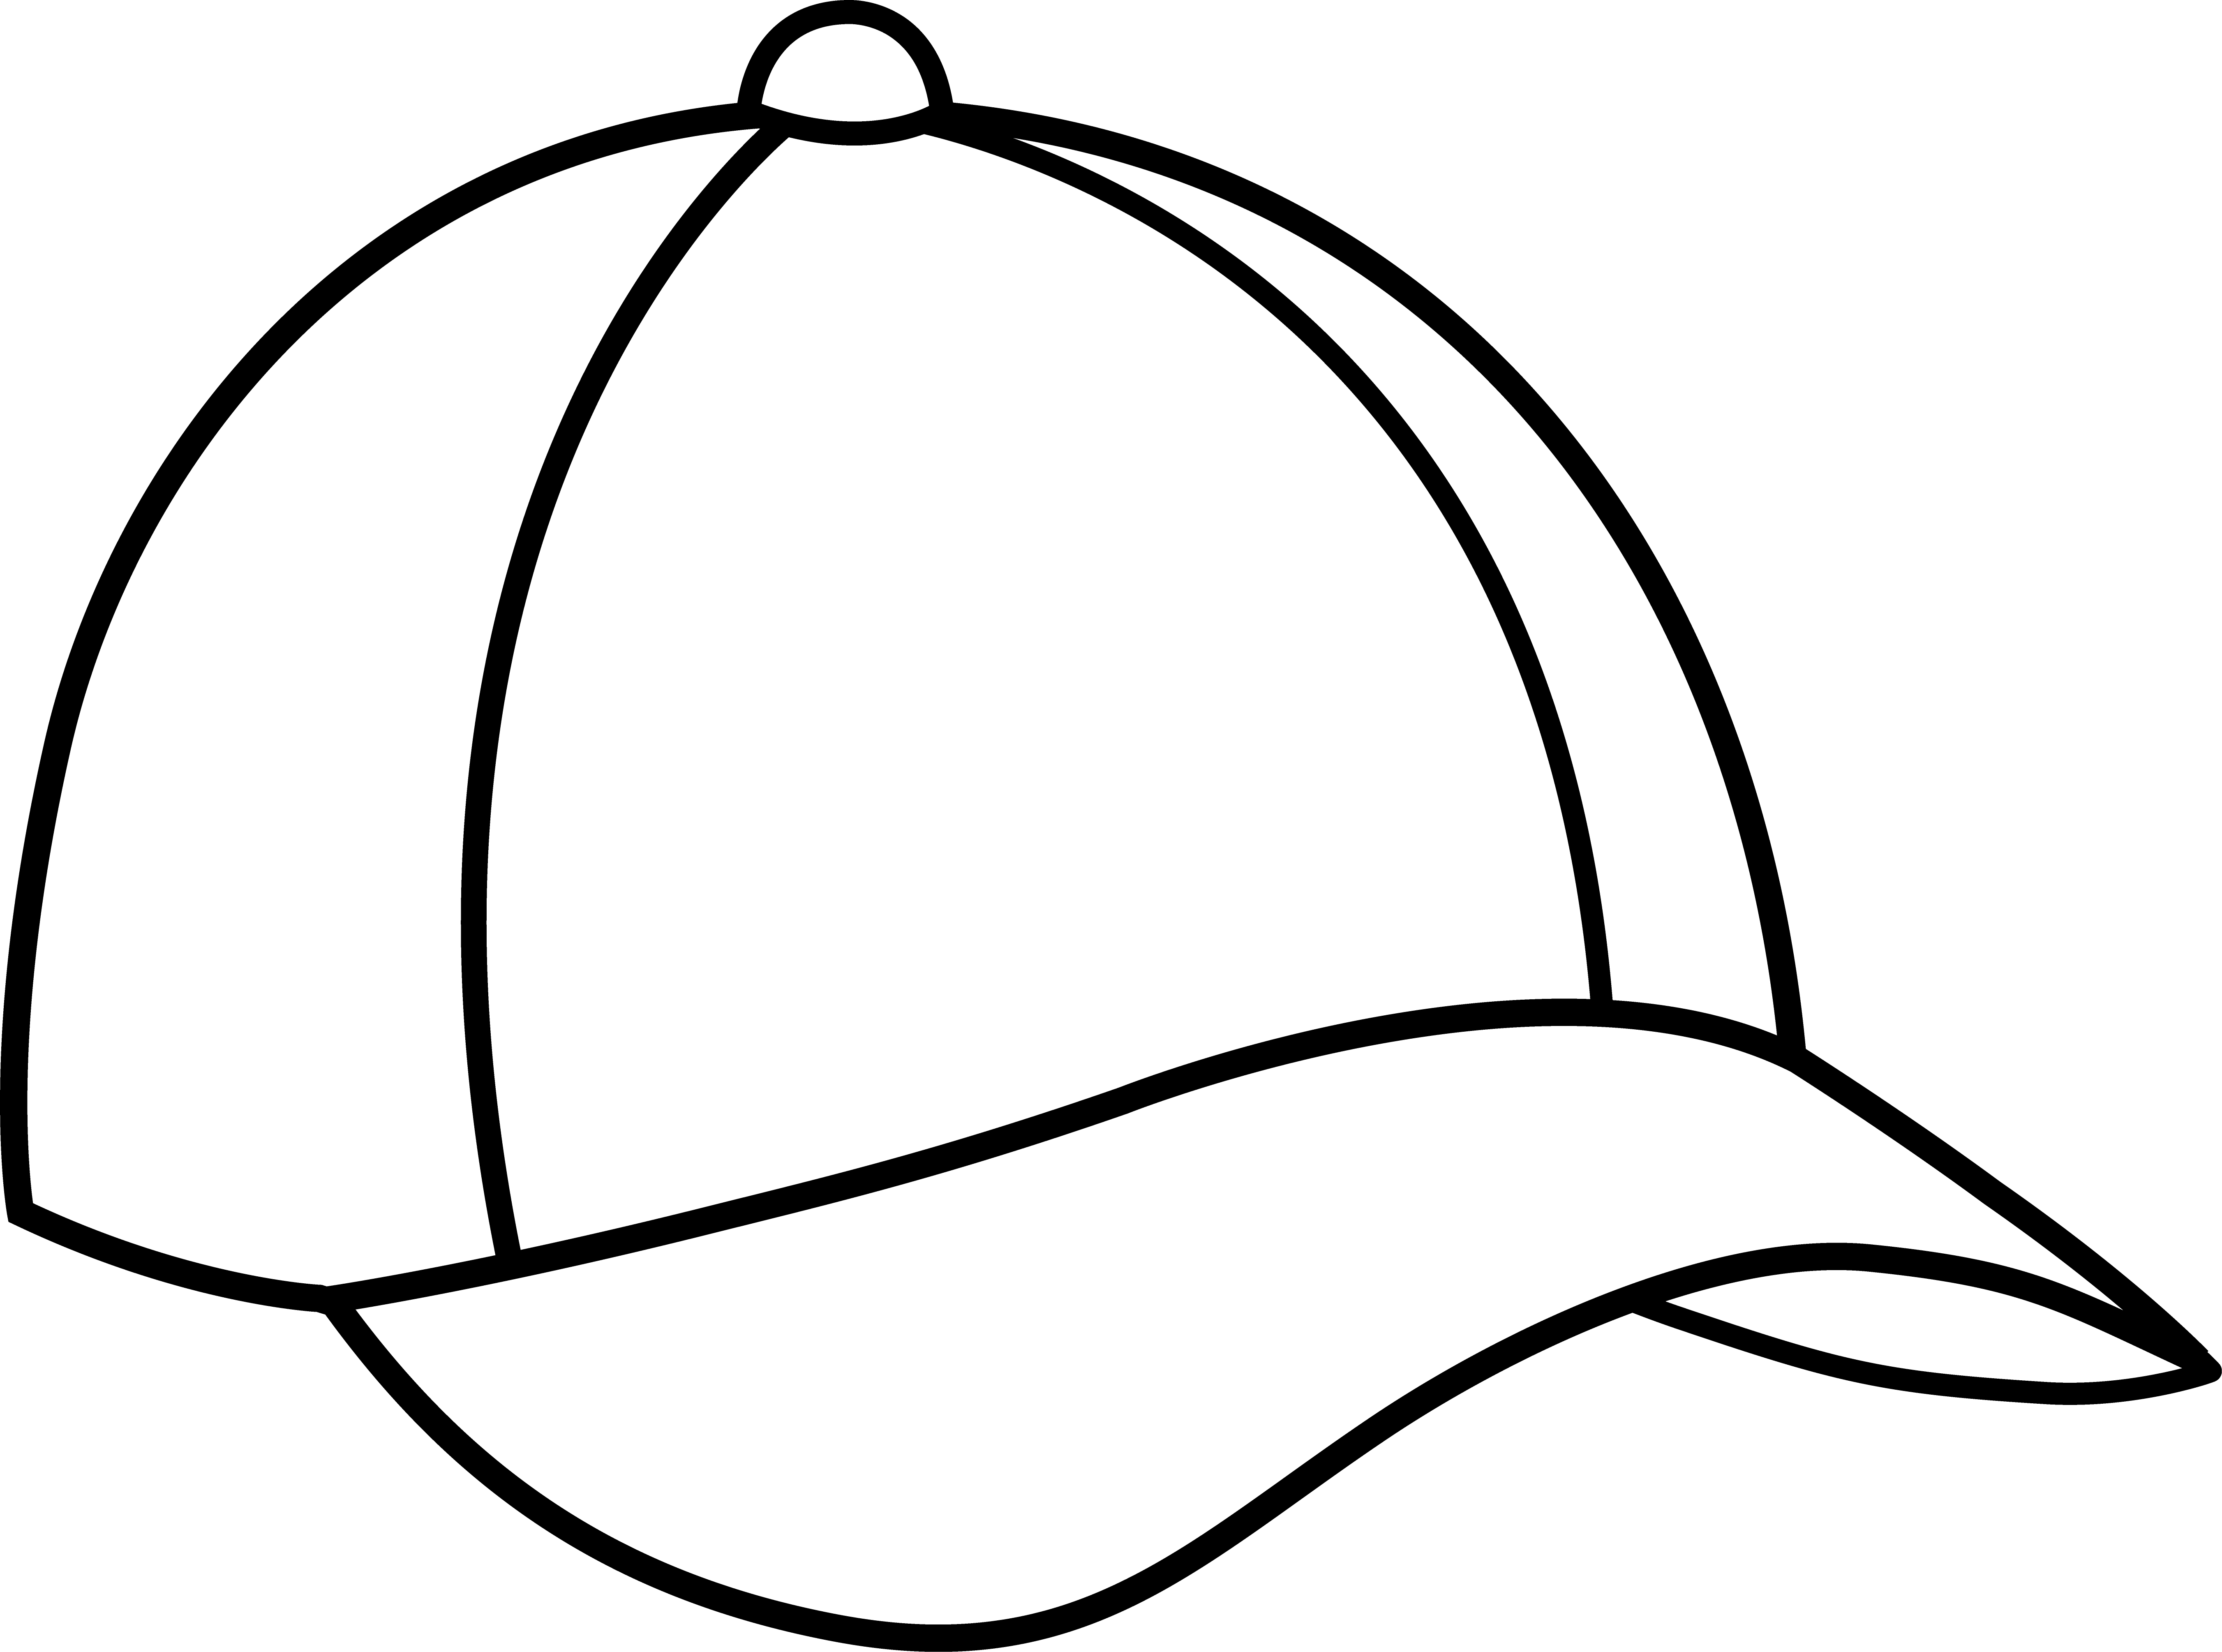 Black And White Baseball Cap Clip Art - Winter Hat Black And White, Transparent background PNG HD thumbnail